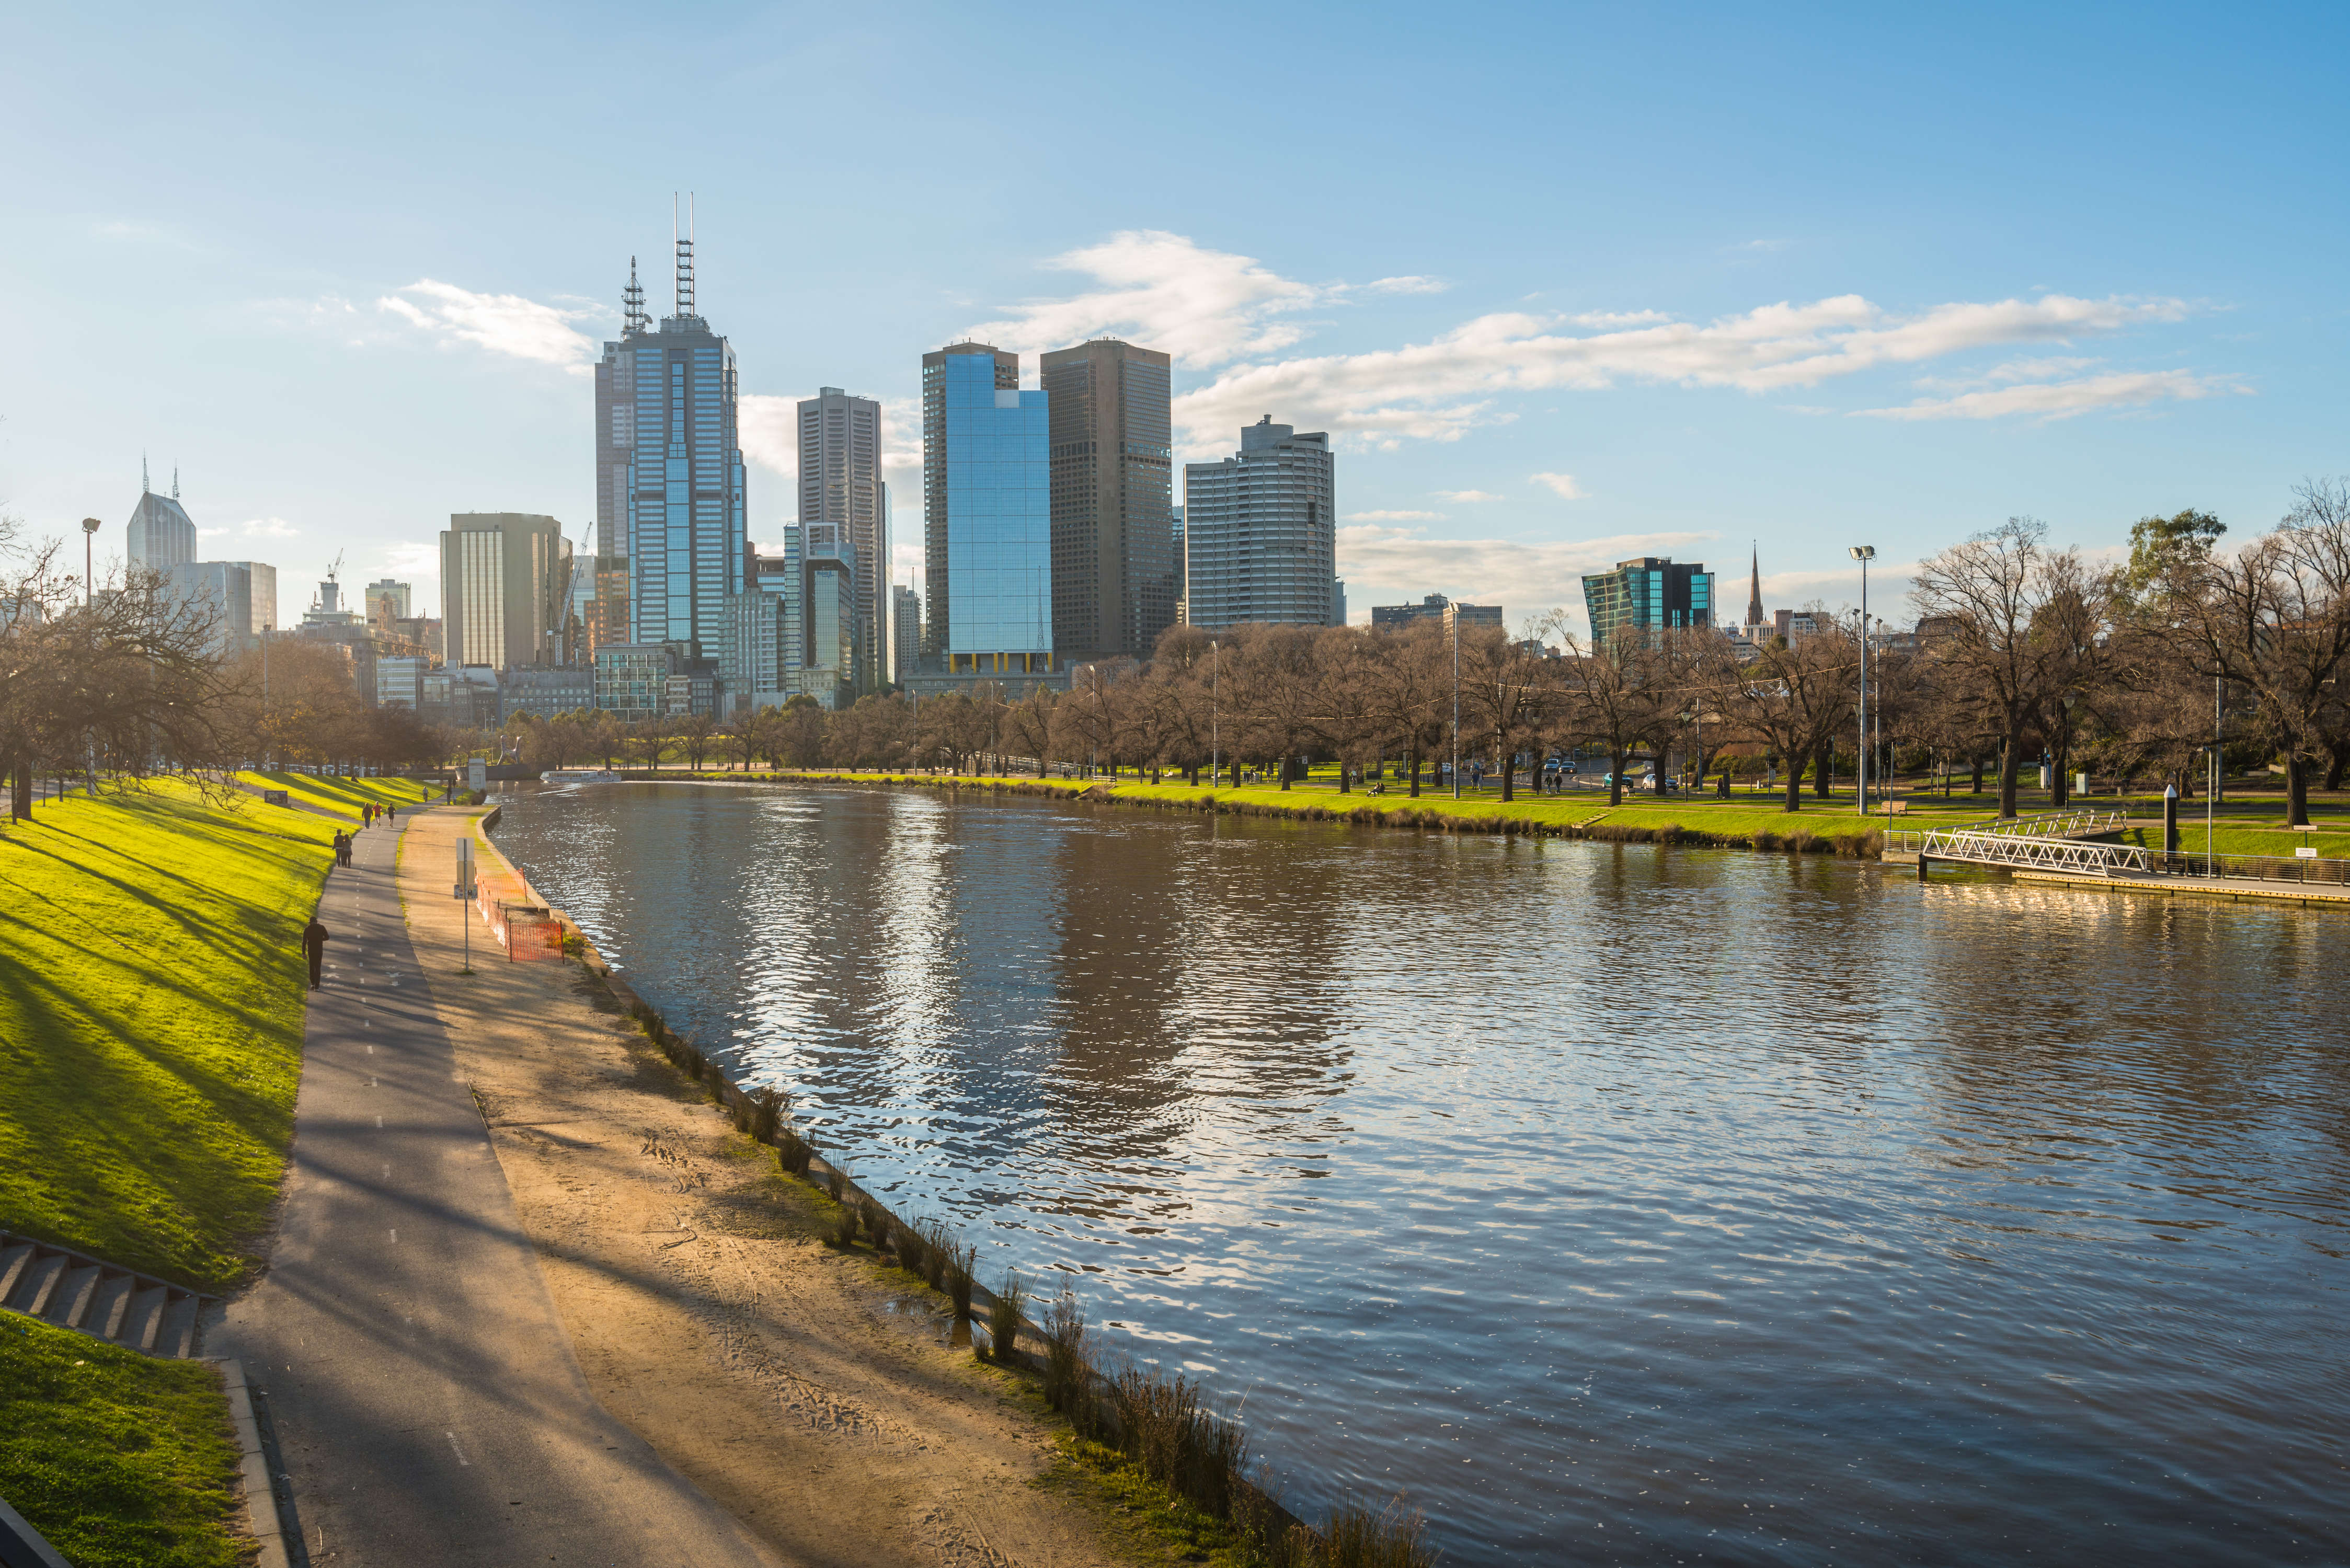 Camping on the Yarra River permitted under new draft rules